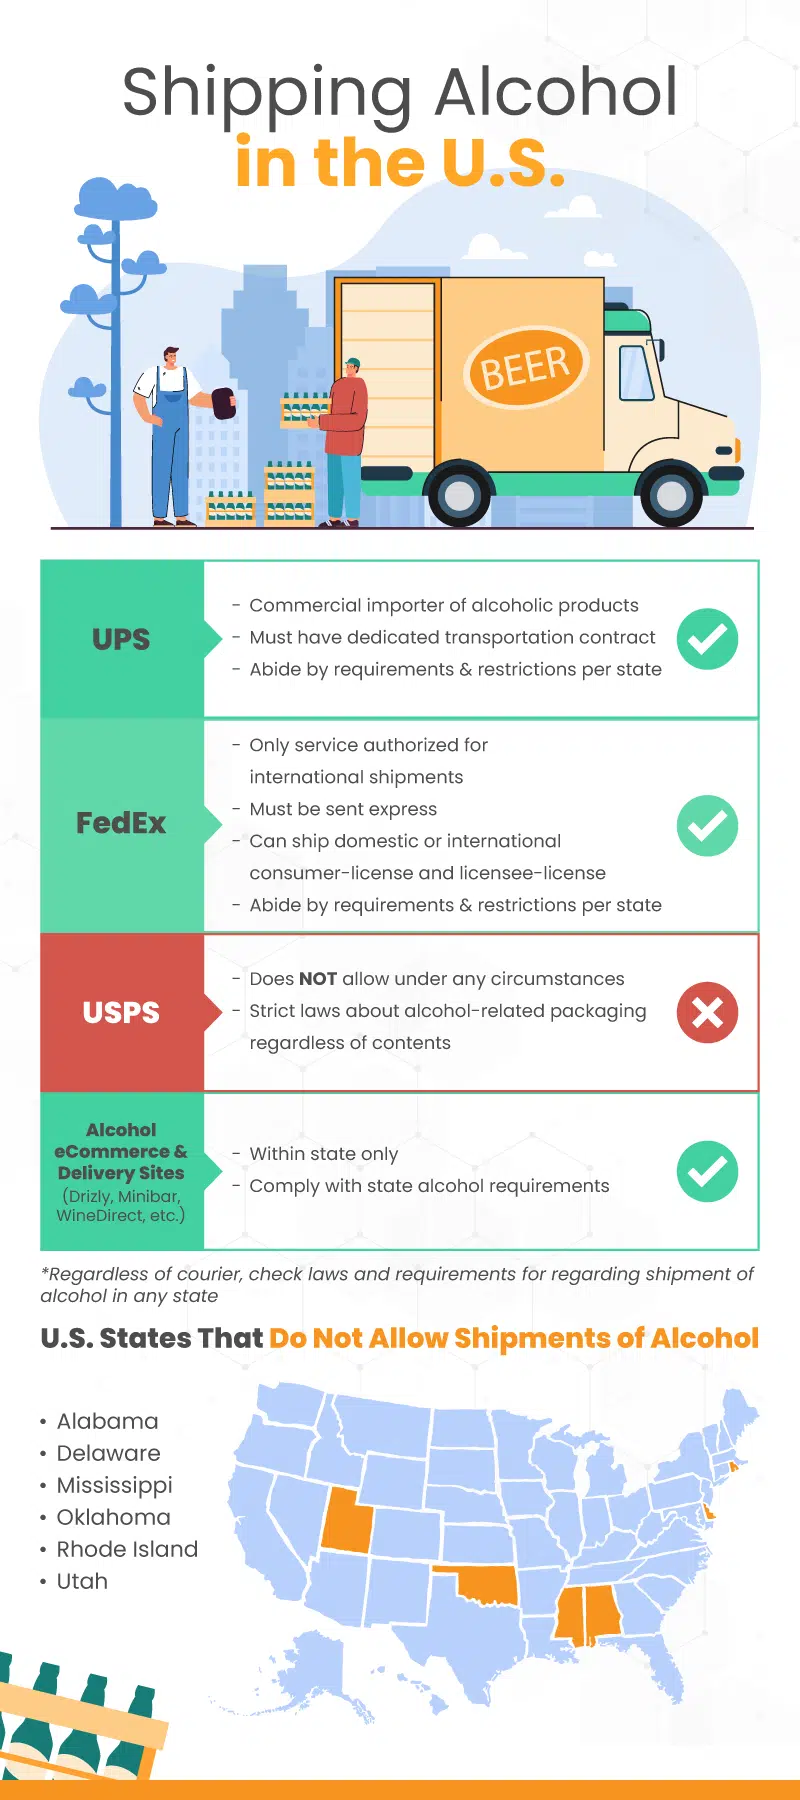 Infograph showing the different regulations for shipping alcohol with the major carriers, including FedEx and UPS, as well as a map showing the states that do not allow shipments of alcohol